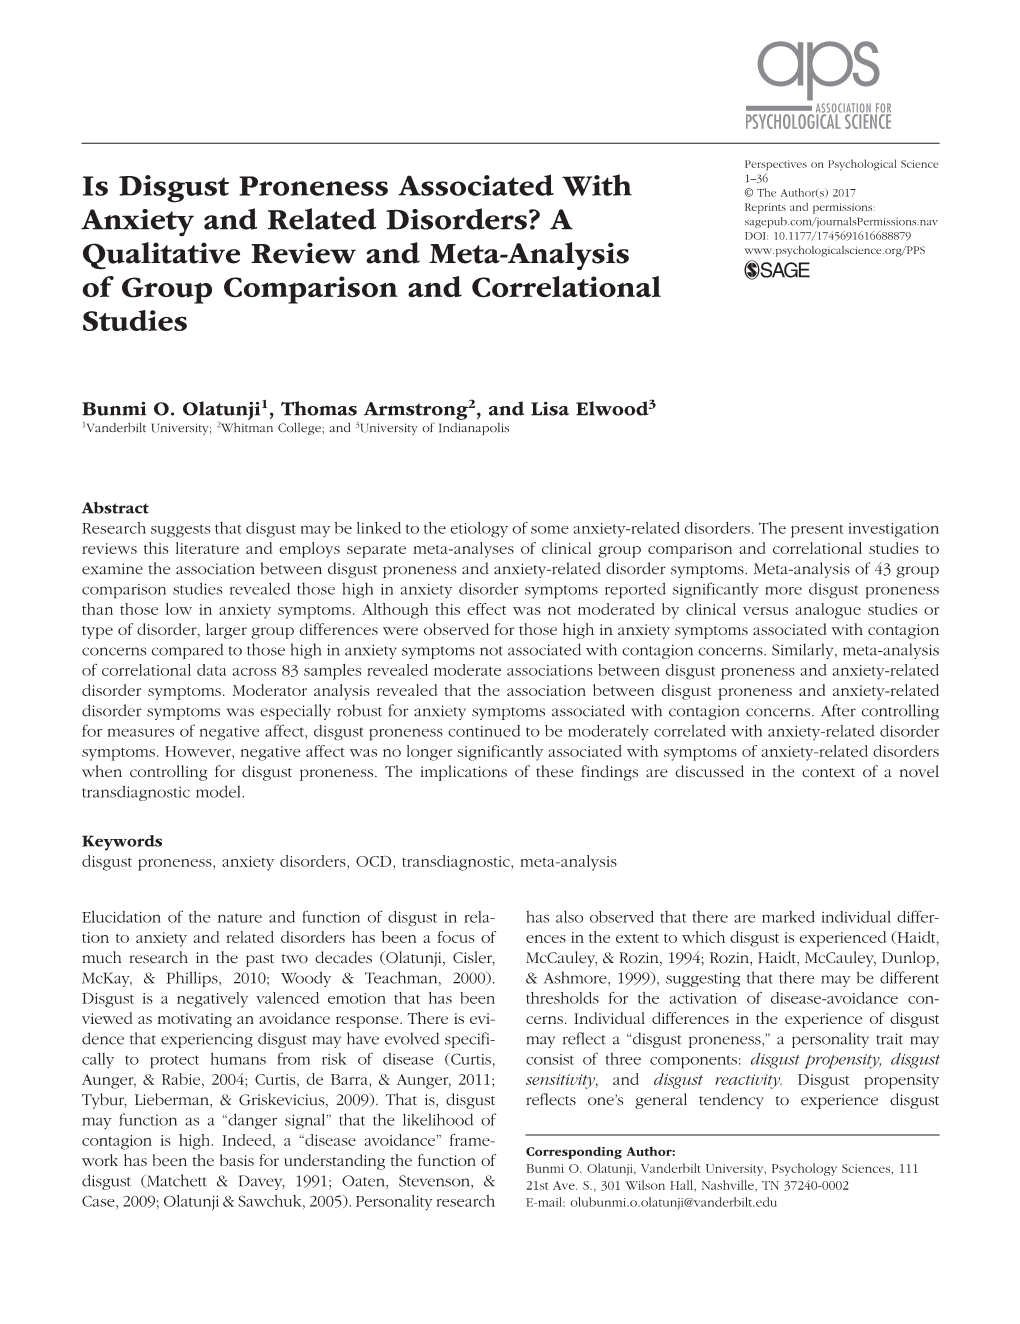 Is Disgust Proneness Associated with Anxiety and Related Disorders? A